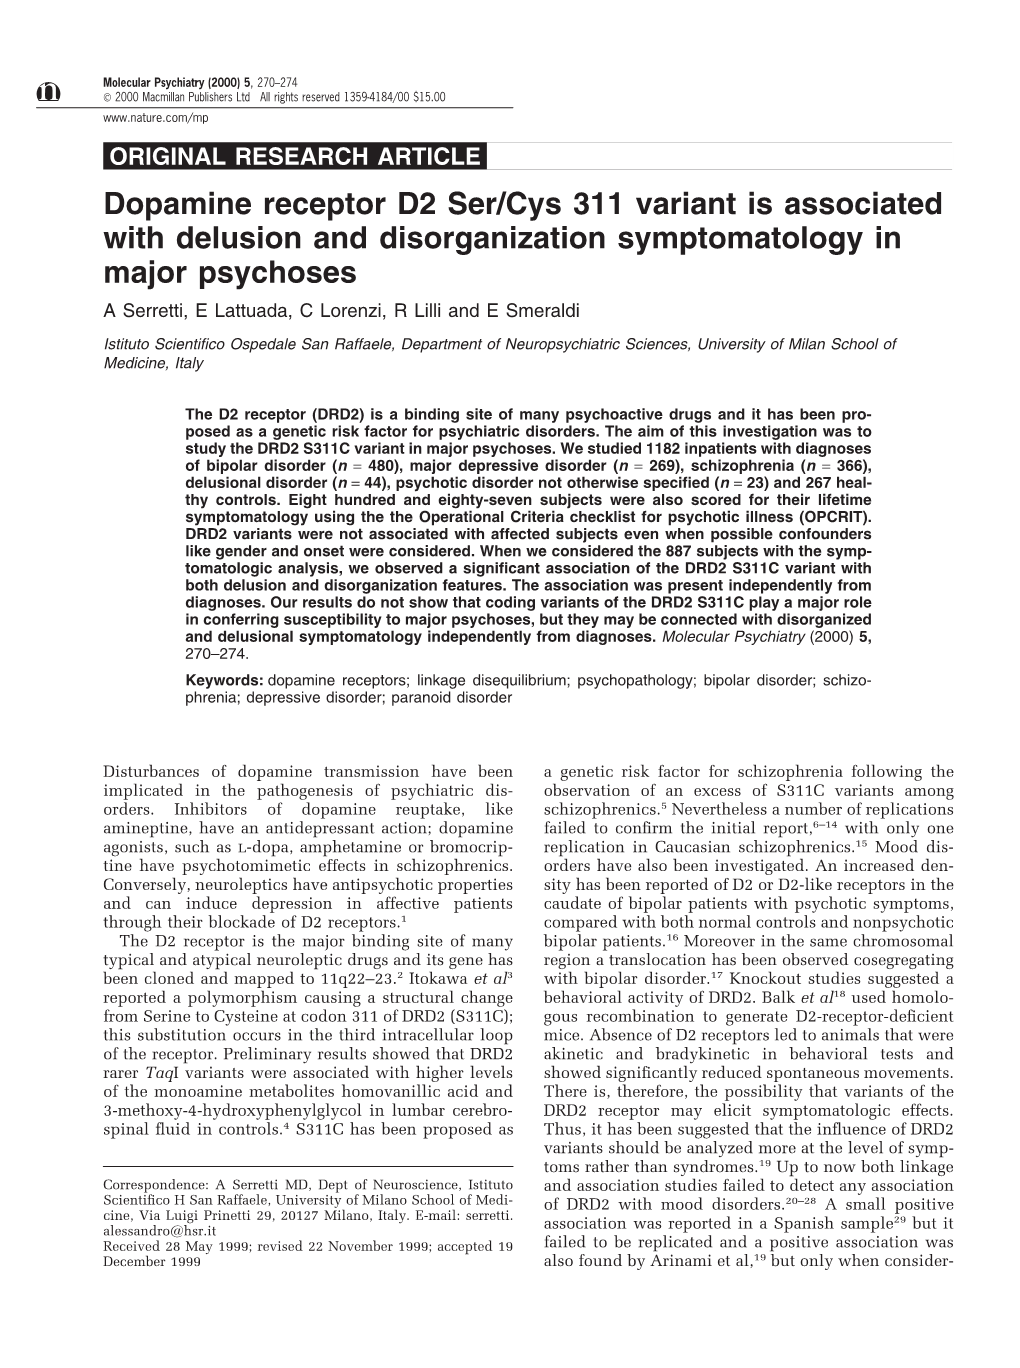 Dopamine Receptor D2 Ser/Cys 311 Variant Is Associated with Delusion